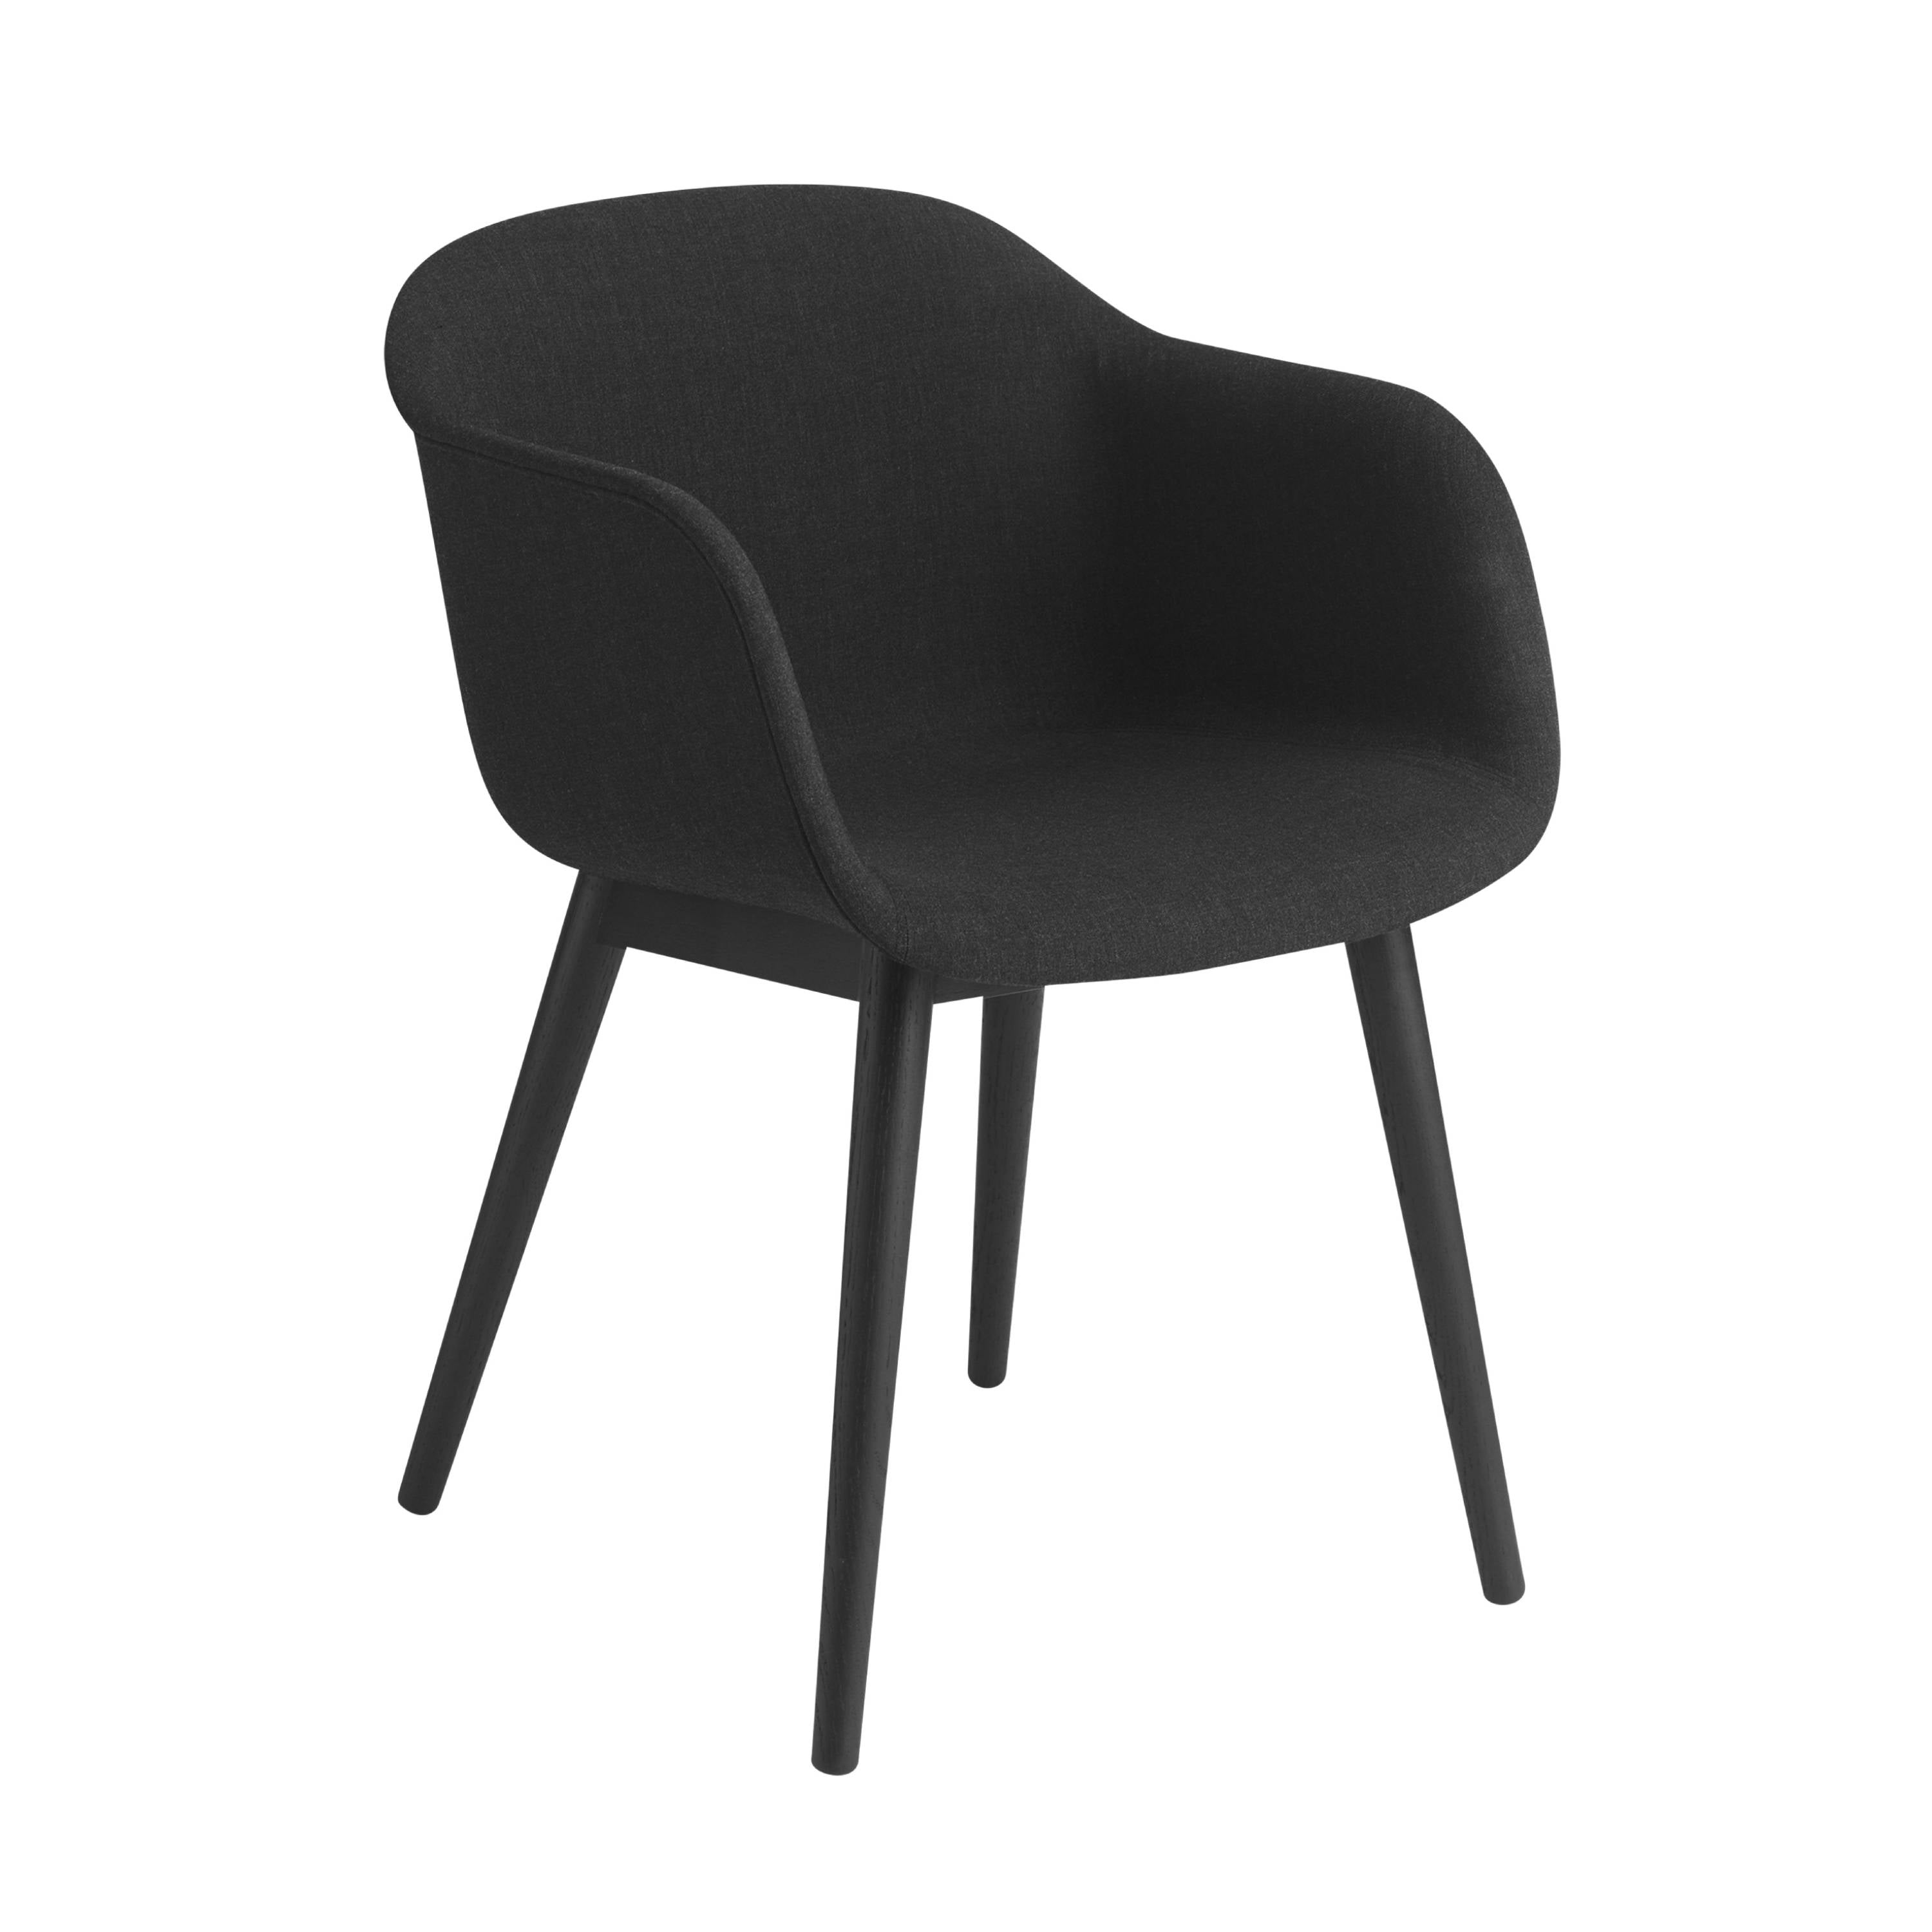 Fiber Armchair: Wood Base + Recycled Shell + Upholstered +  Black